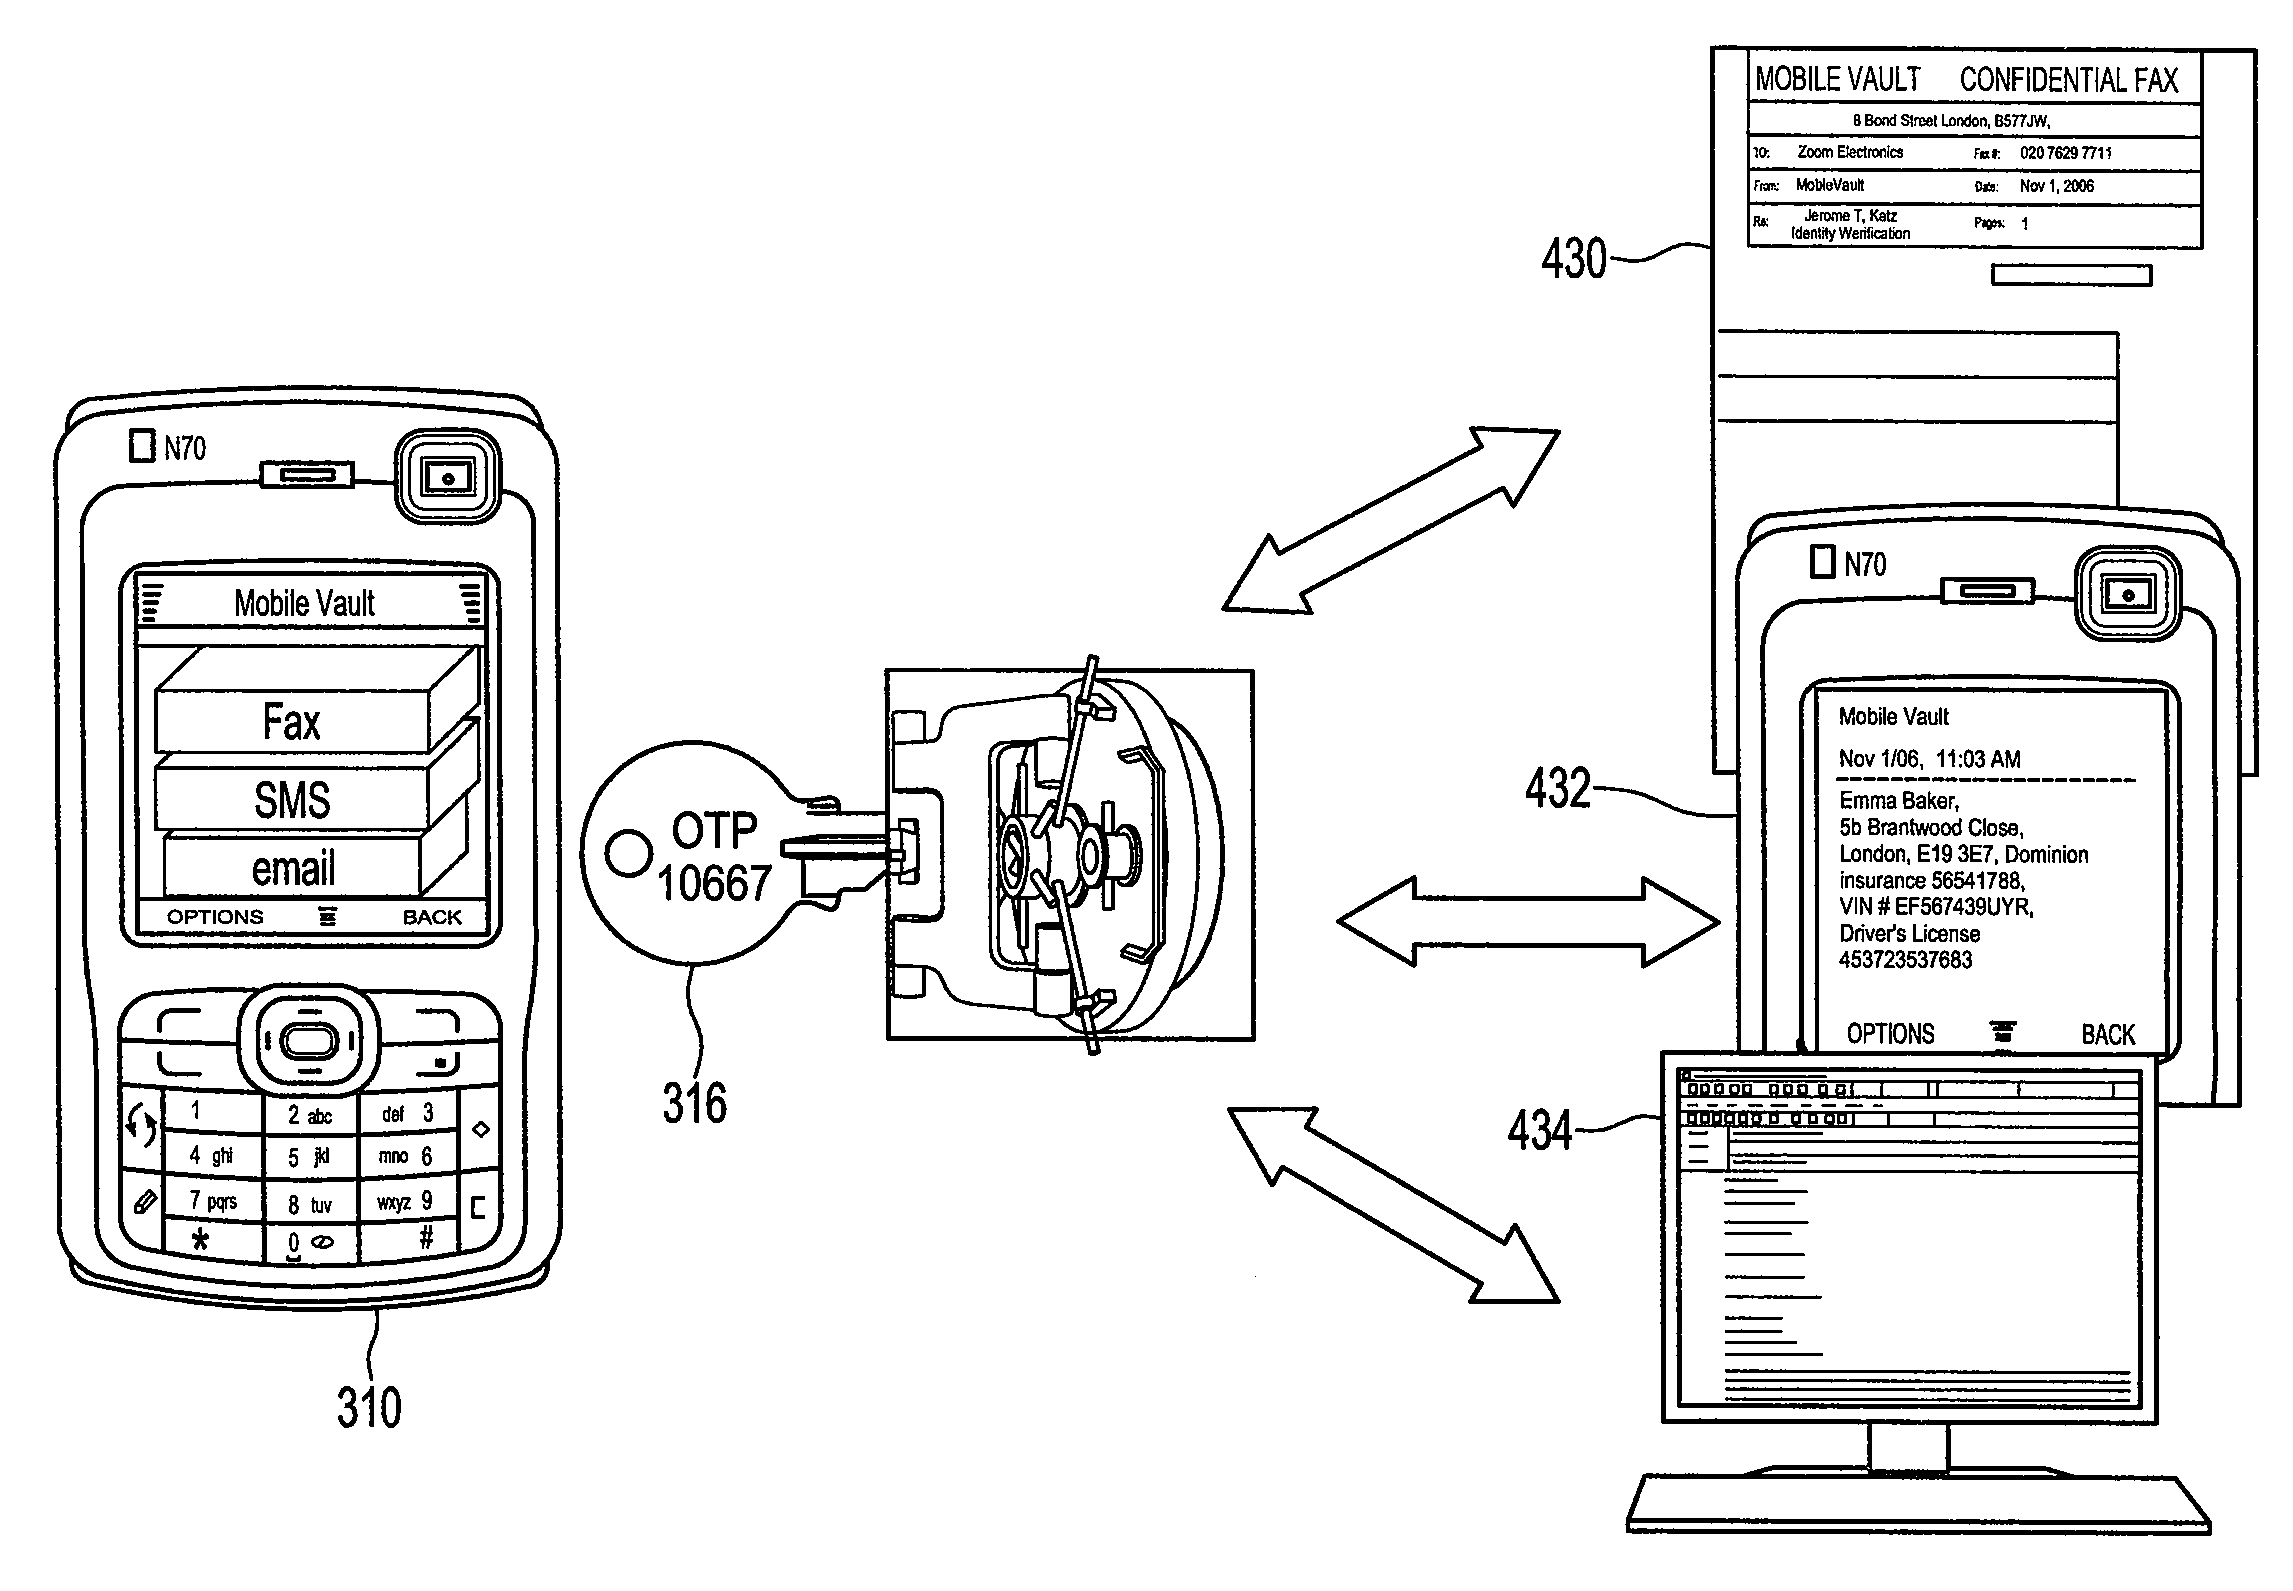 Secure identity and personal information storage and transfer